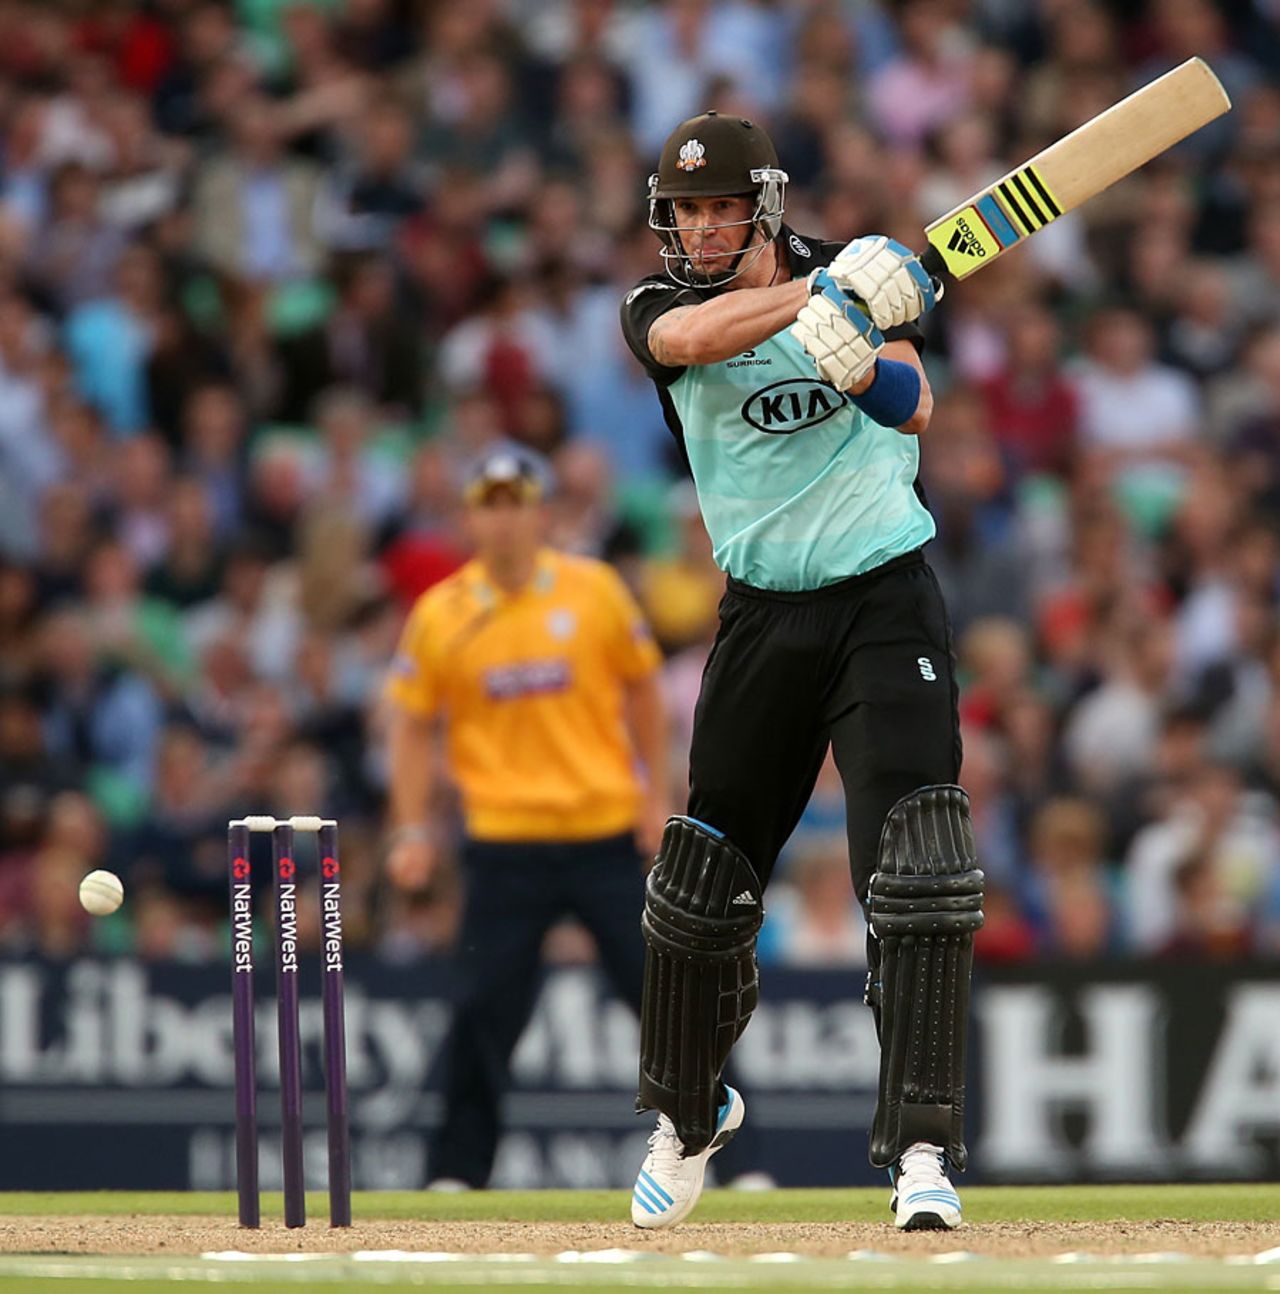 Kevin Pietersen helped finish Surrey's chase with an unbeaten 24, Surrey v Hampshire, NatWest T20 Blast, South Division, The Oval, June 27, 2014